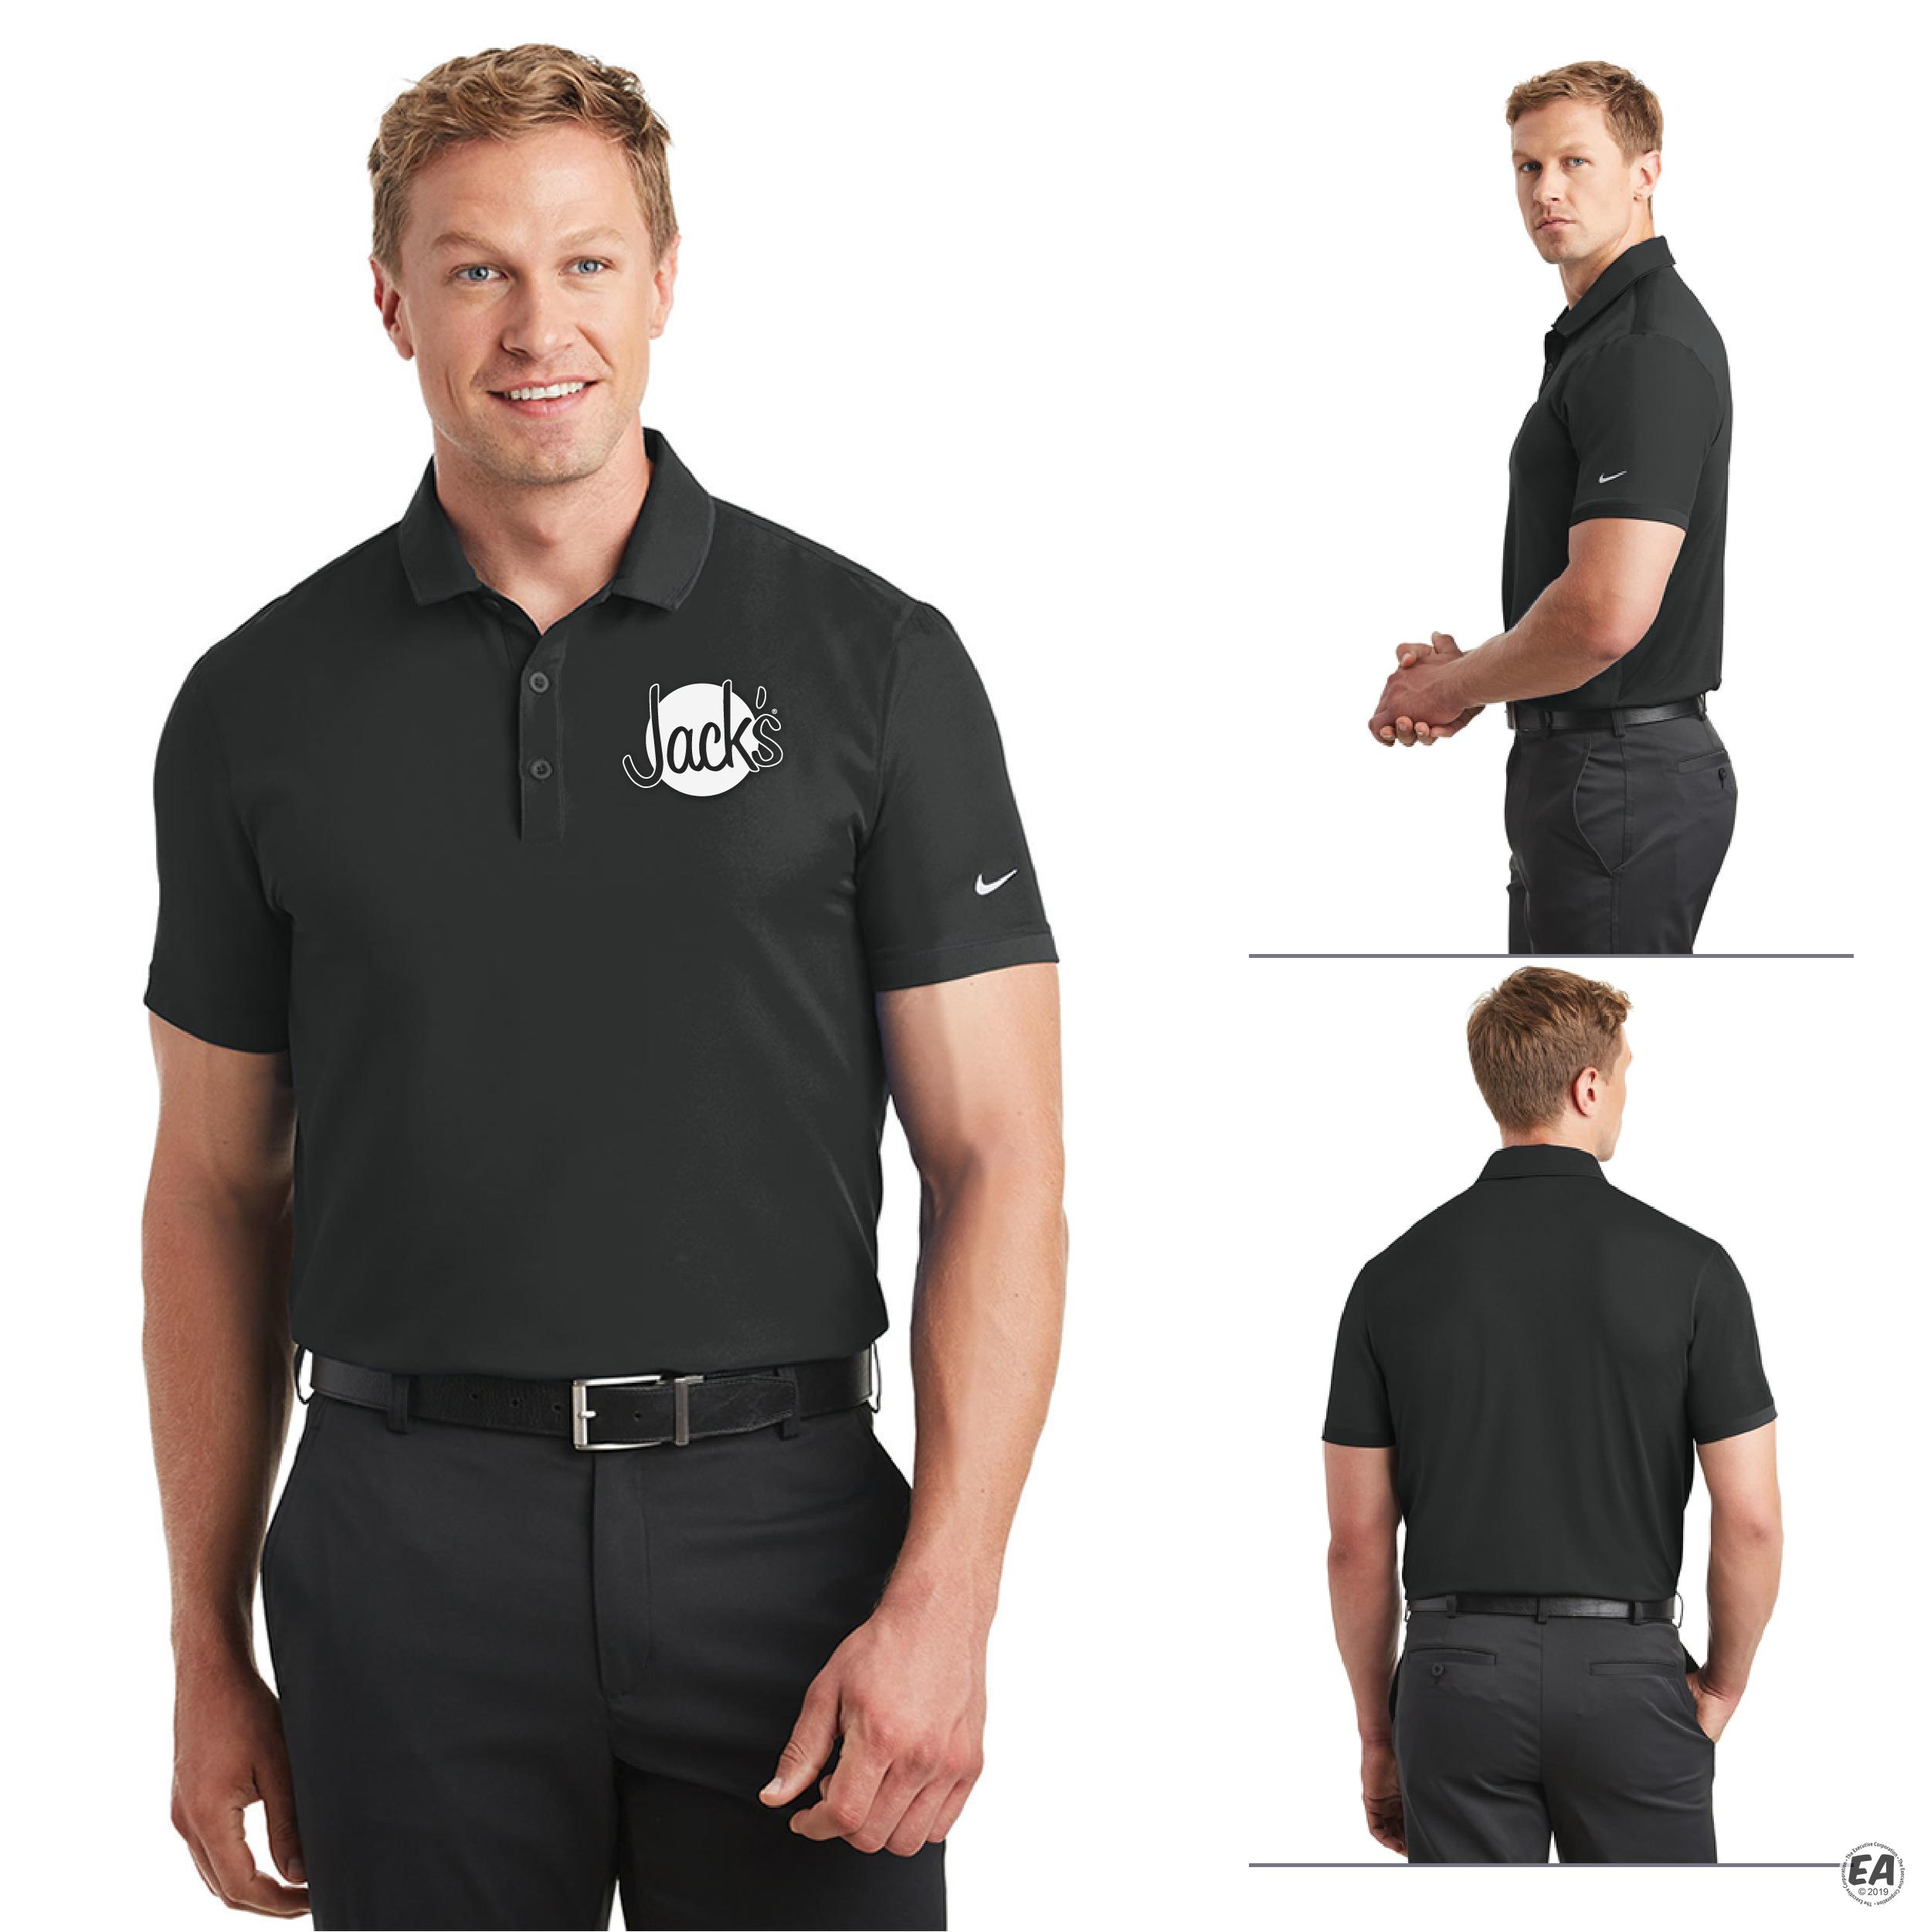 Customized Nike 838958 Dri-FIT Stretch Woven Polo | Promotional ...